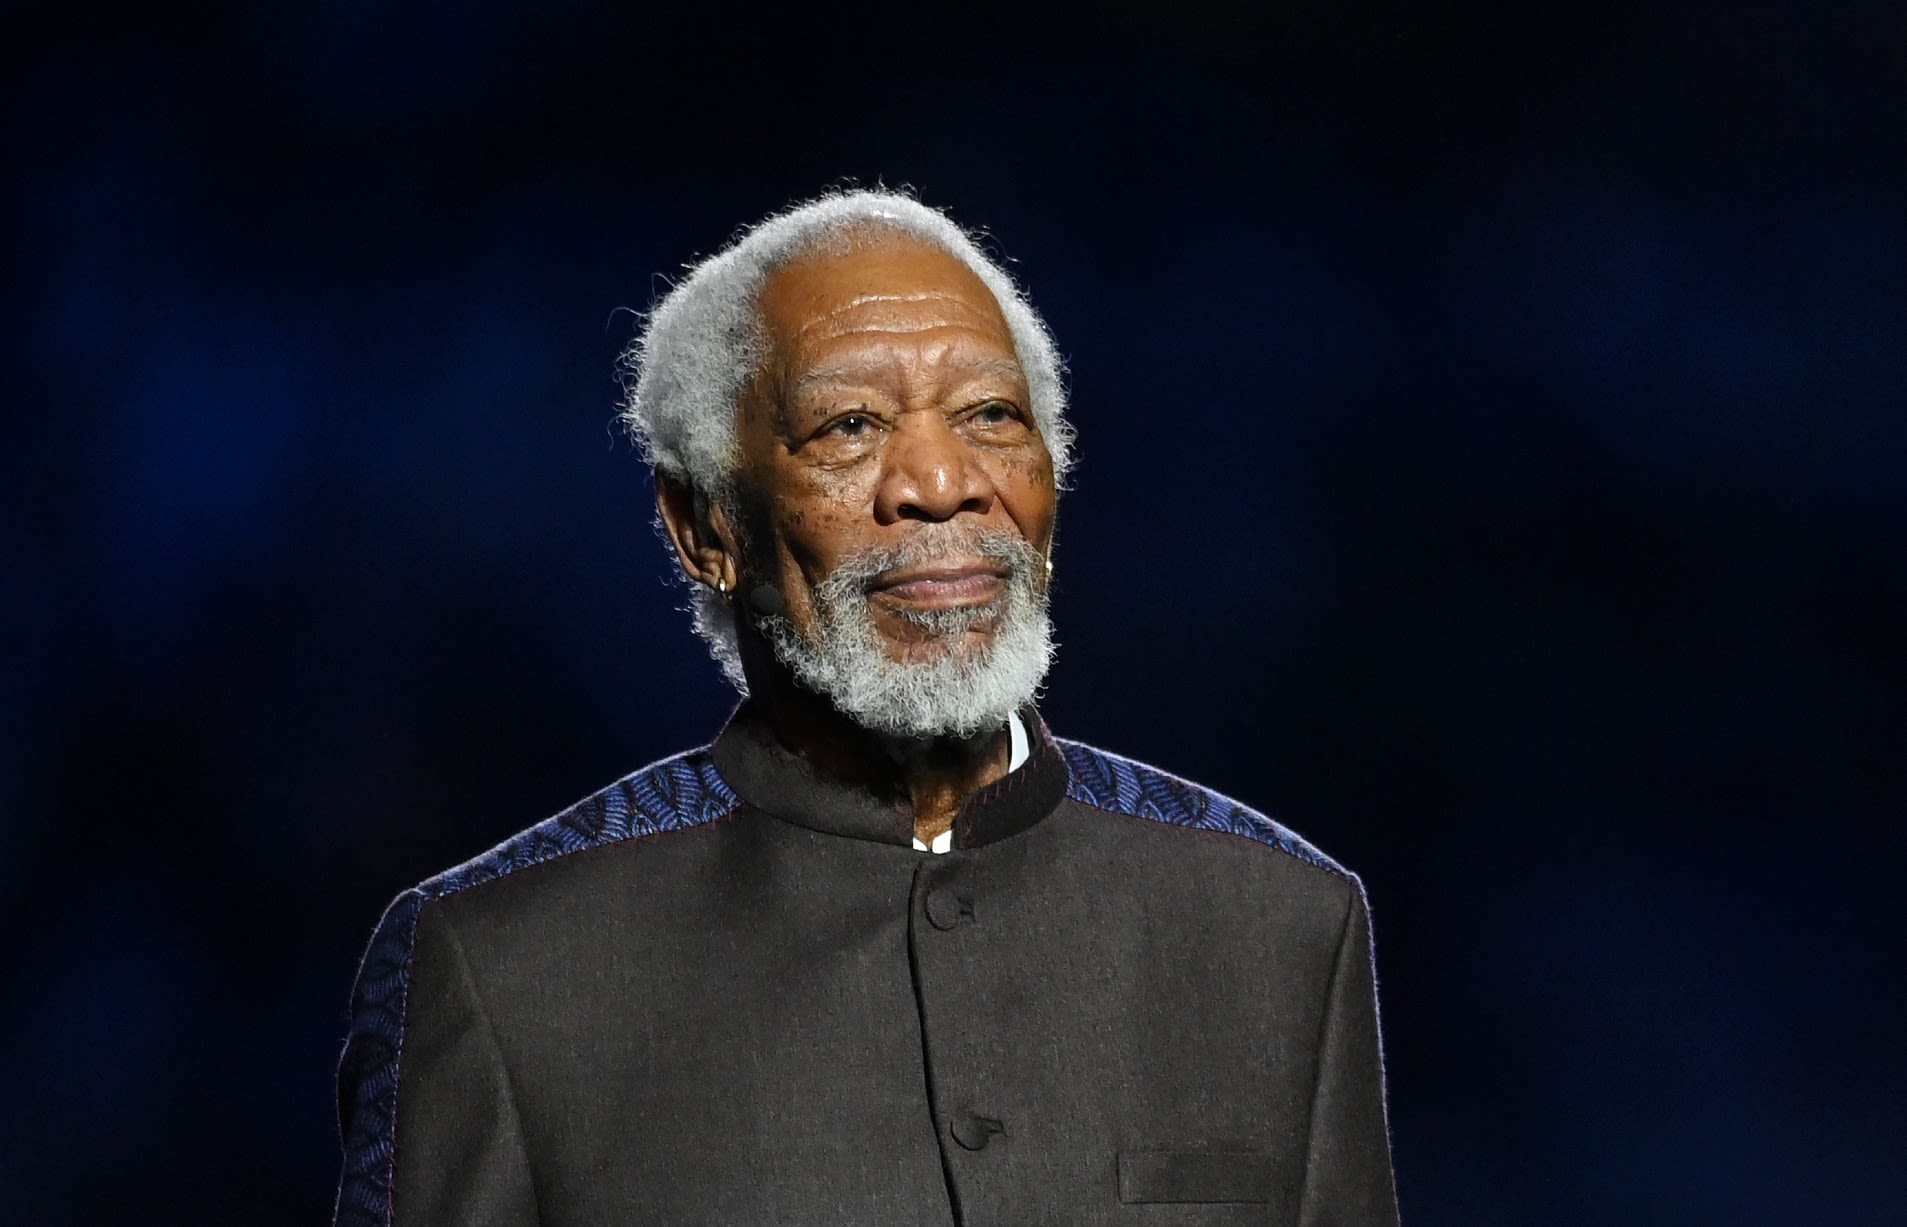 Morgan Freeman, Olivier Marchal, Simone Ashley To Be Feted At The Monte-Carlo TV Festival: Fan Events Set For ‘NCIS...